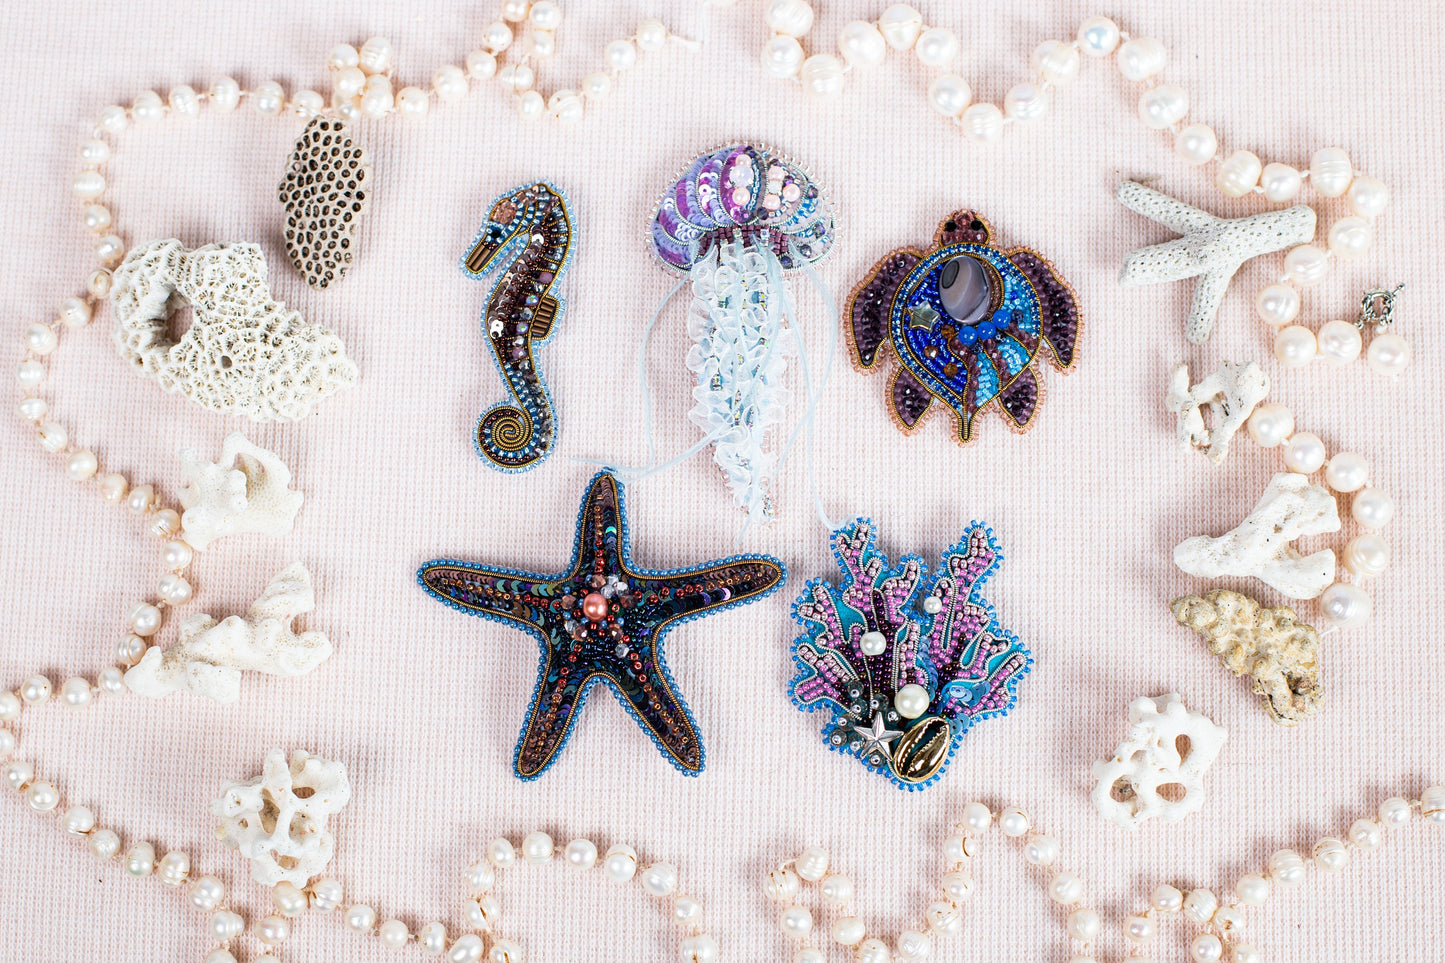 Set of 5 DIY Beaded Brooches Kits, Craft kits, Beaded Sea Creatures Brooches, Jewelry Making Kits for Adults, Needlework beading